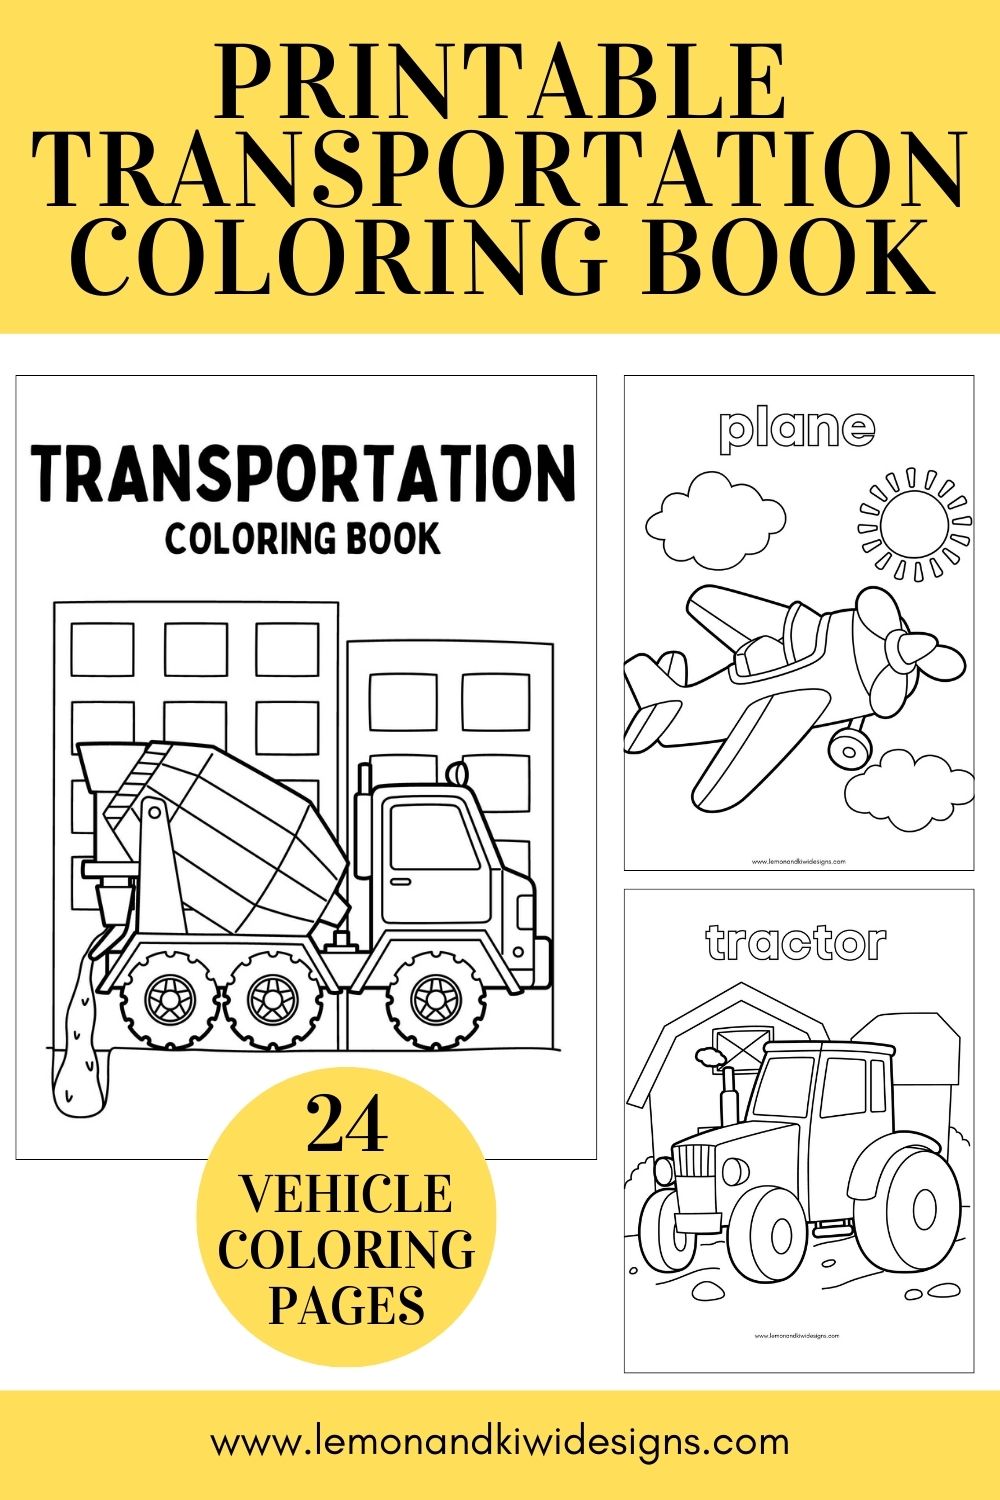 Printable Vehicles Coloring Pages and Printable Transportation Coloring Book